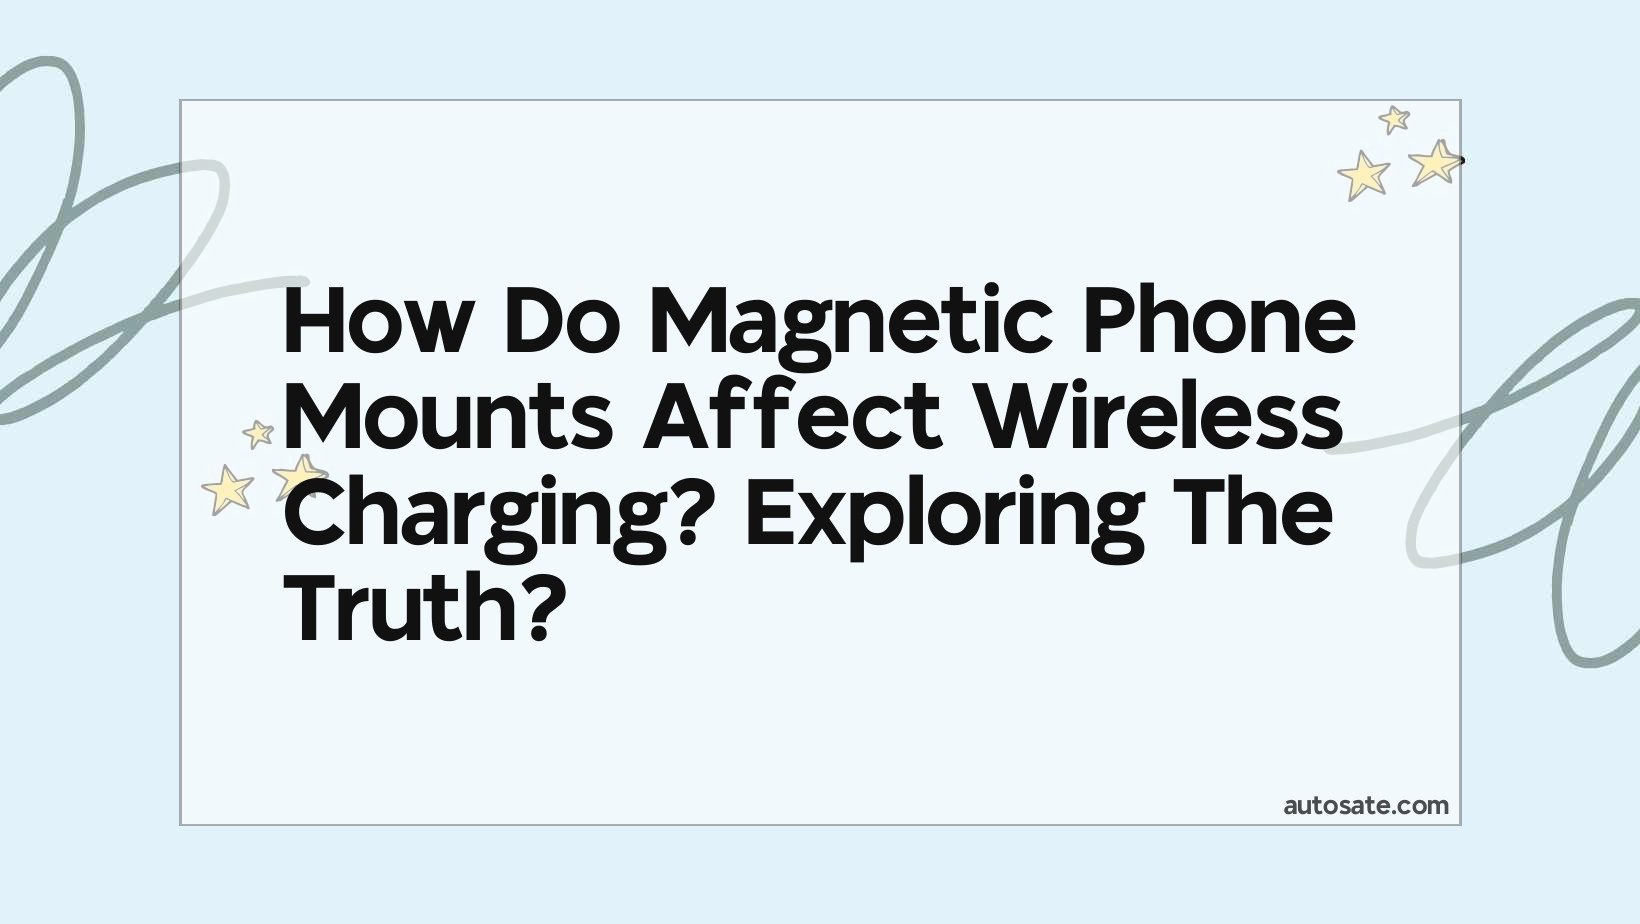 Do Magnetic Phone Mounts Affect Wireless Charging? Exploring The Truth